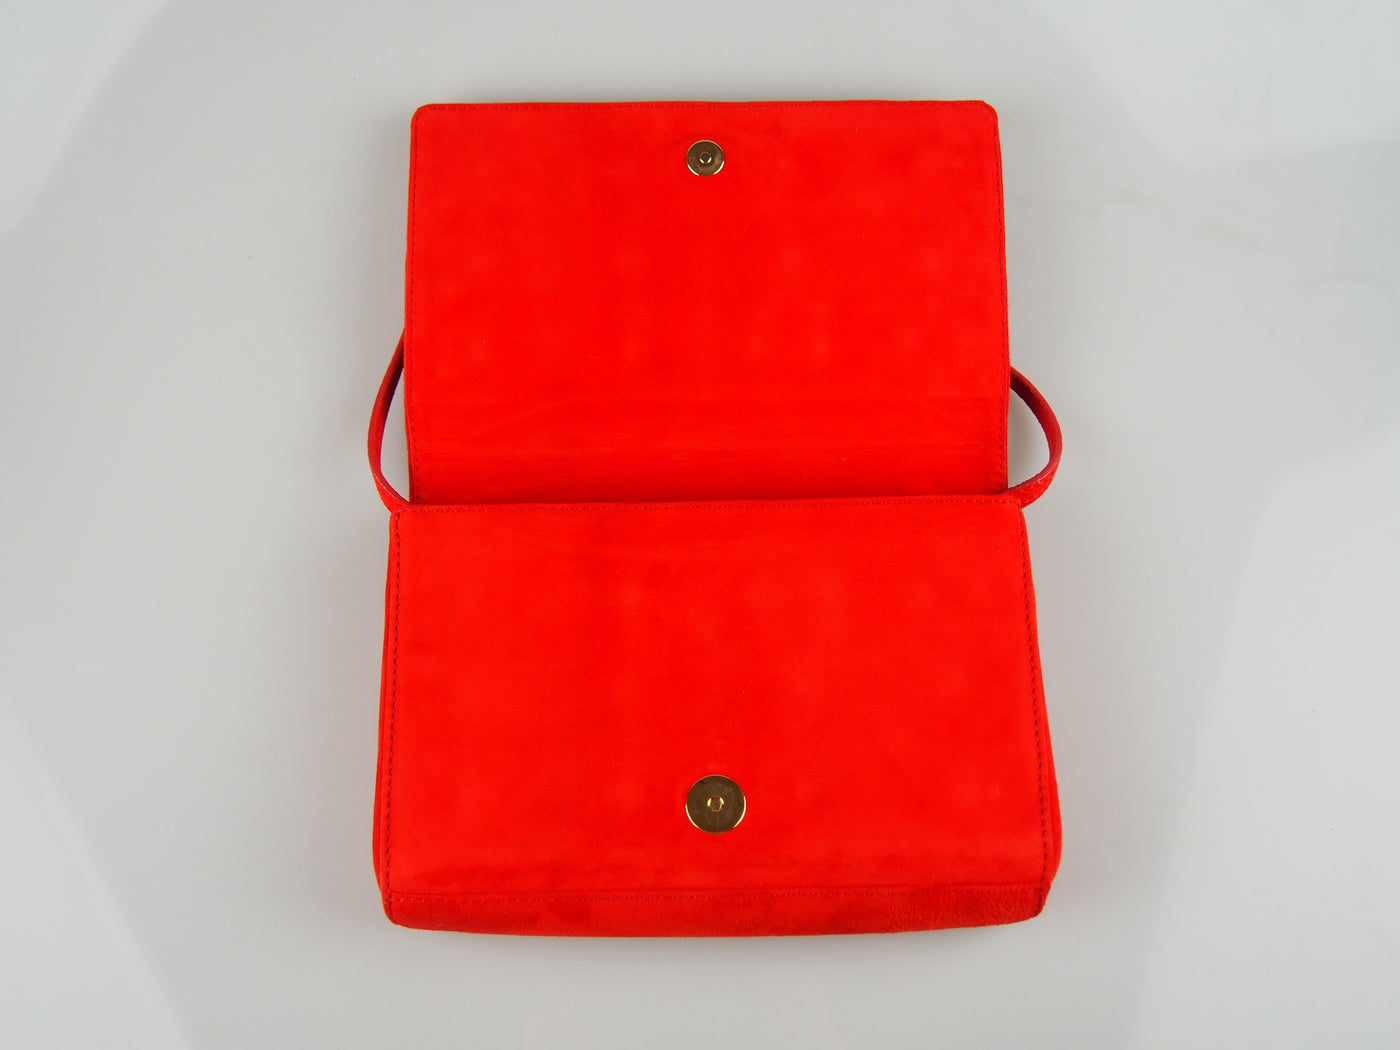 Red suede studded clutch